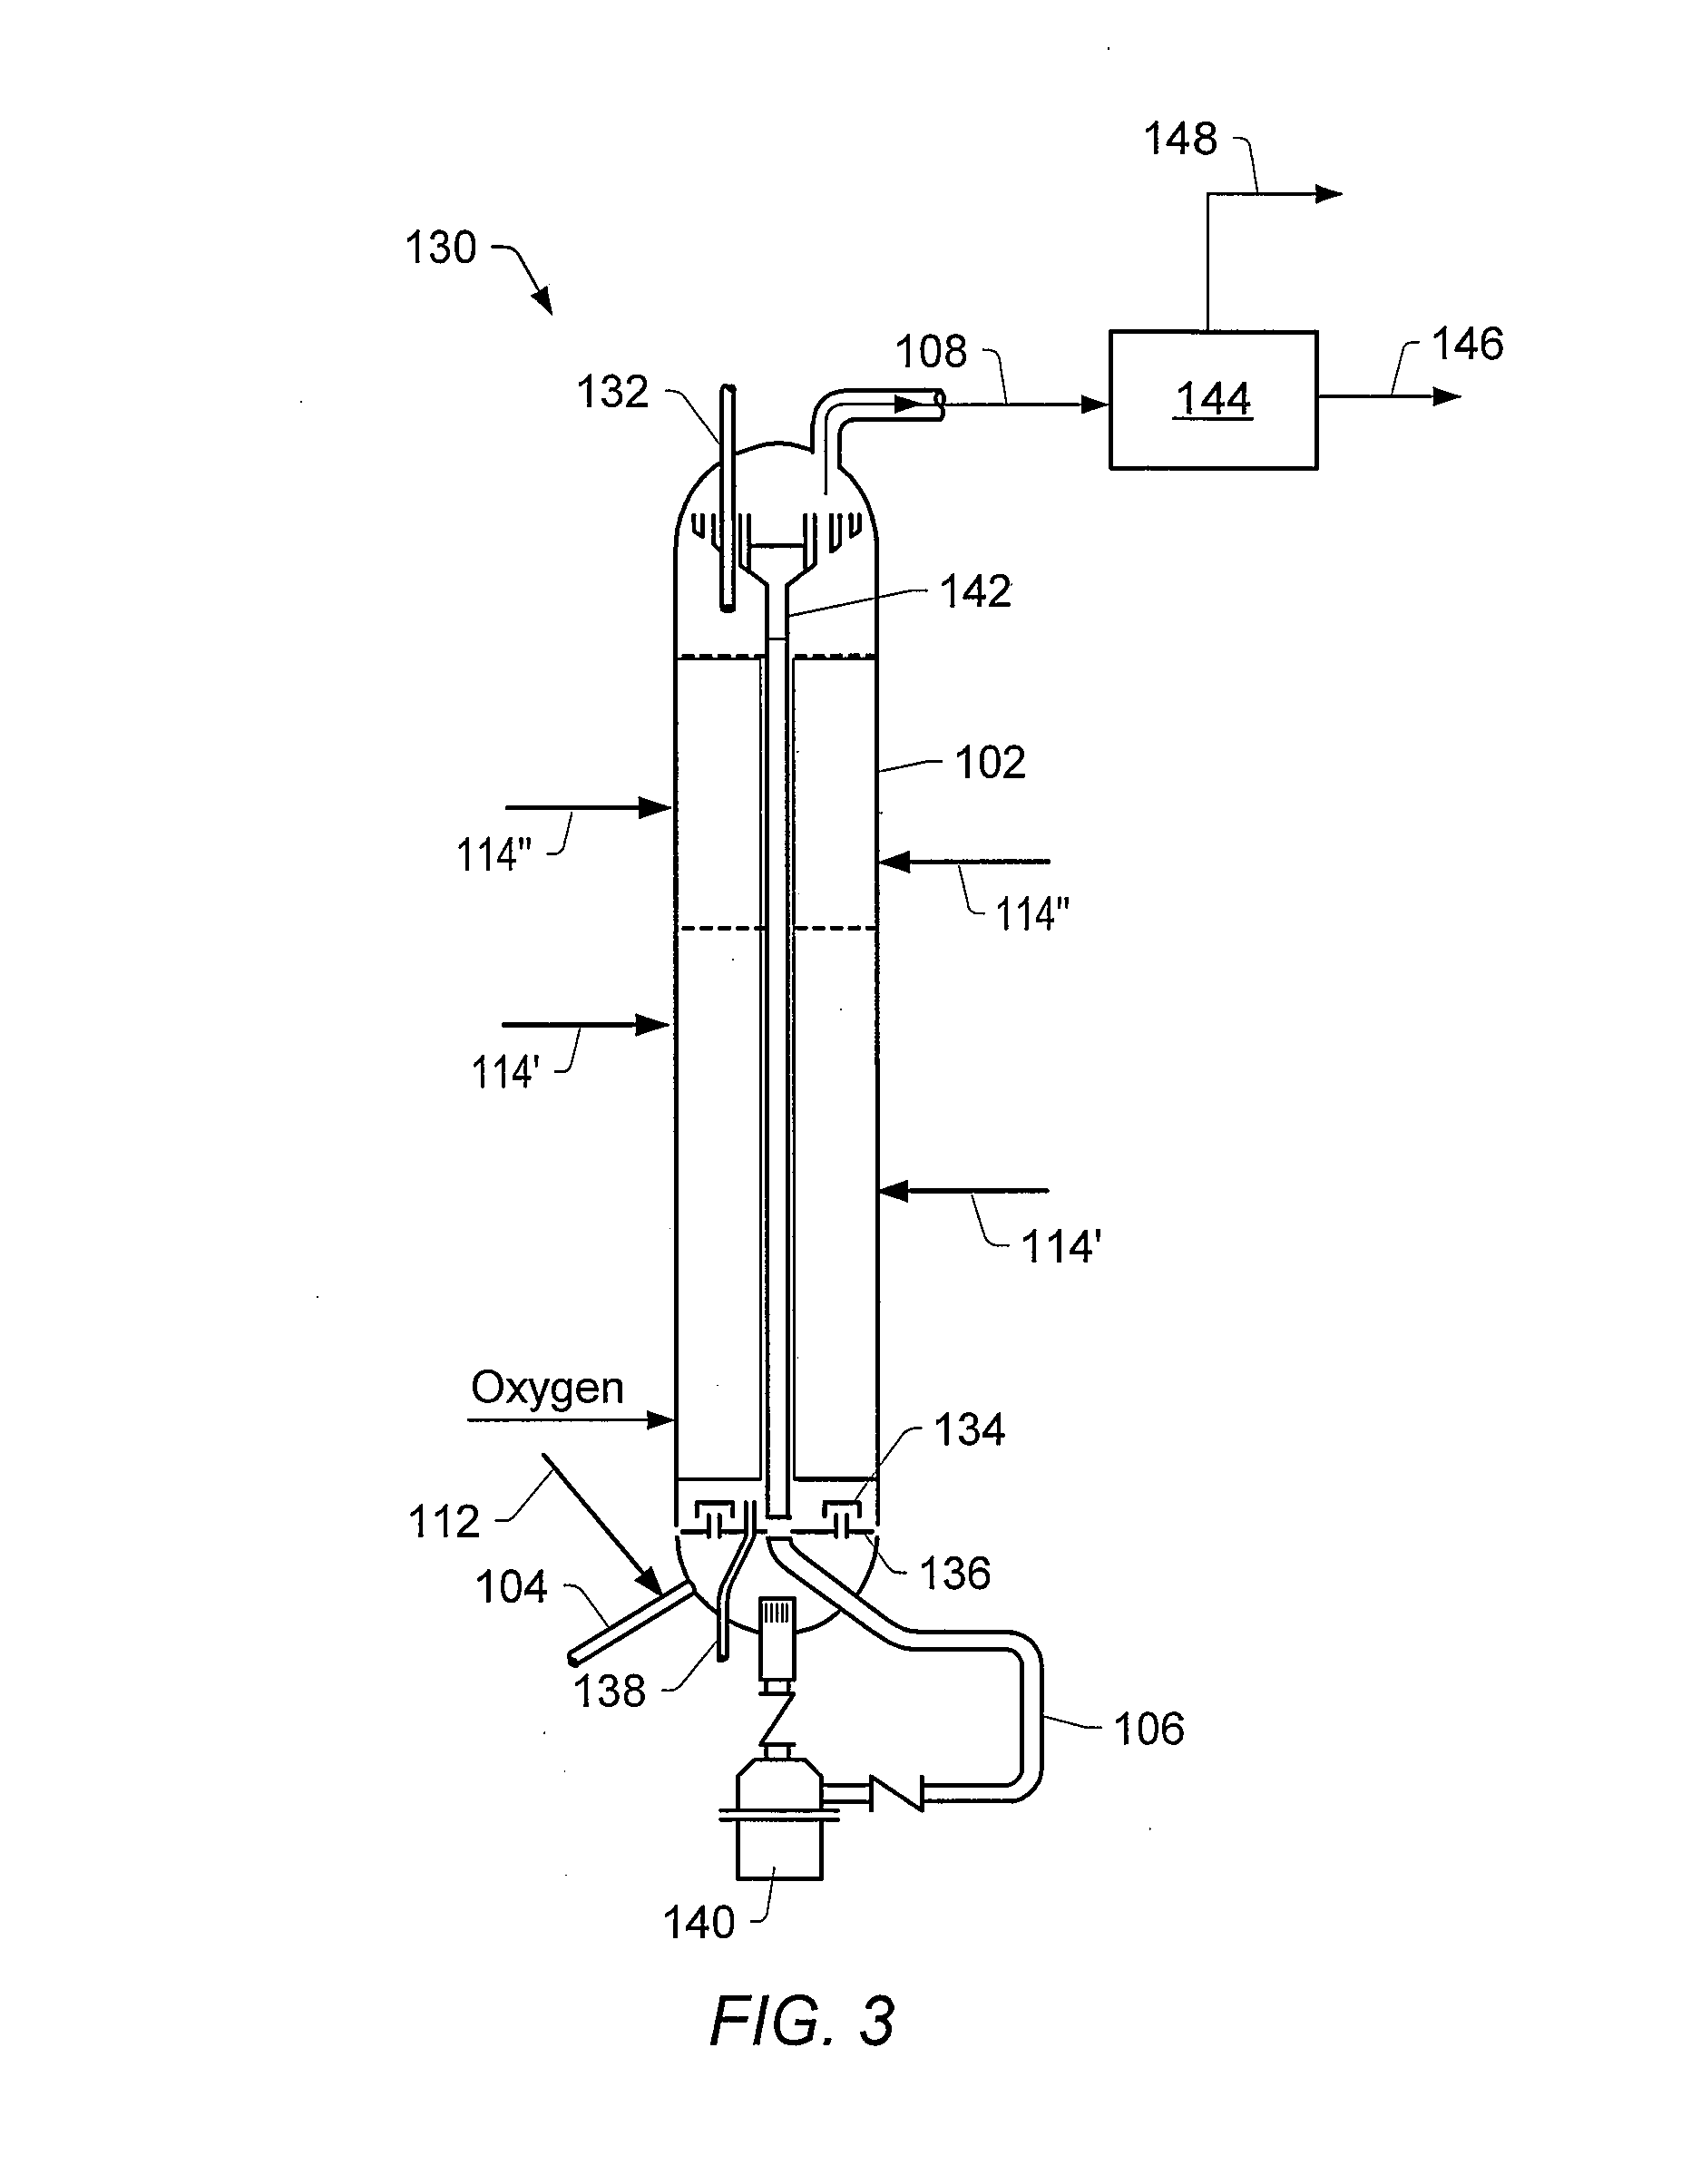 Methods for producing a total product with minimal uptake of hydrogen